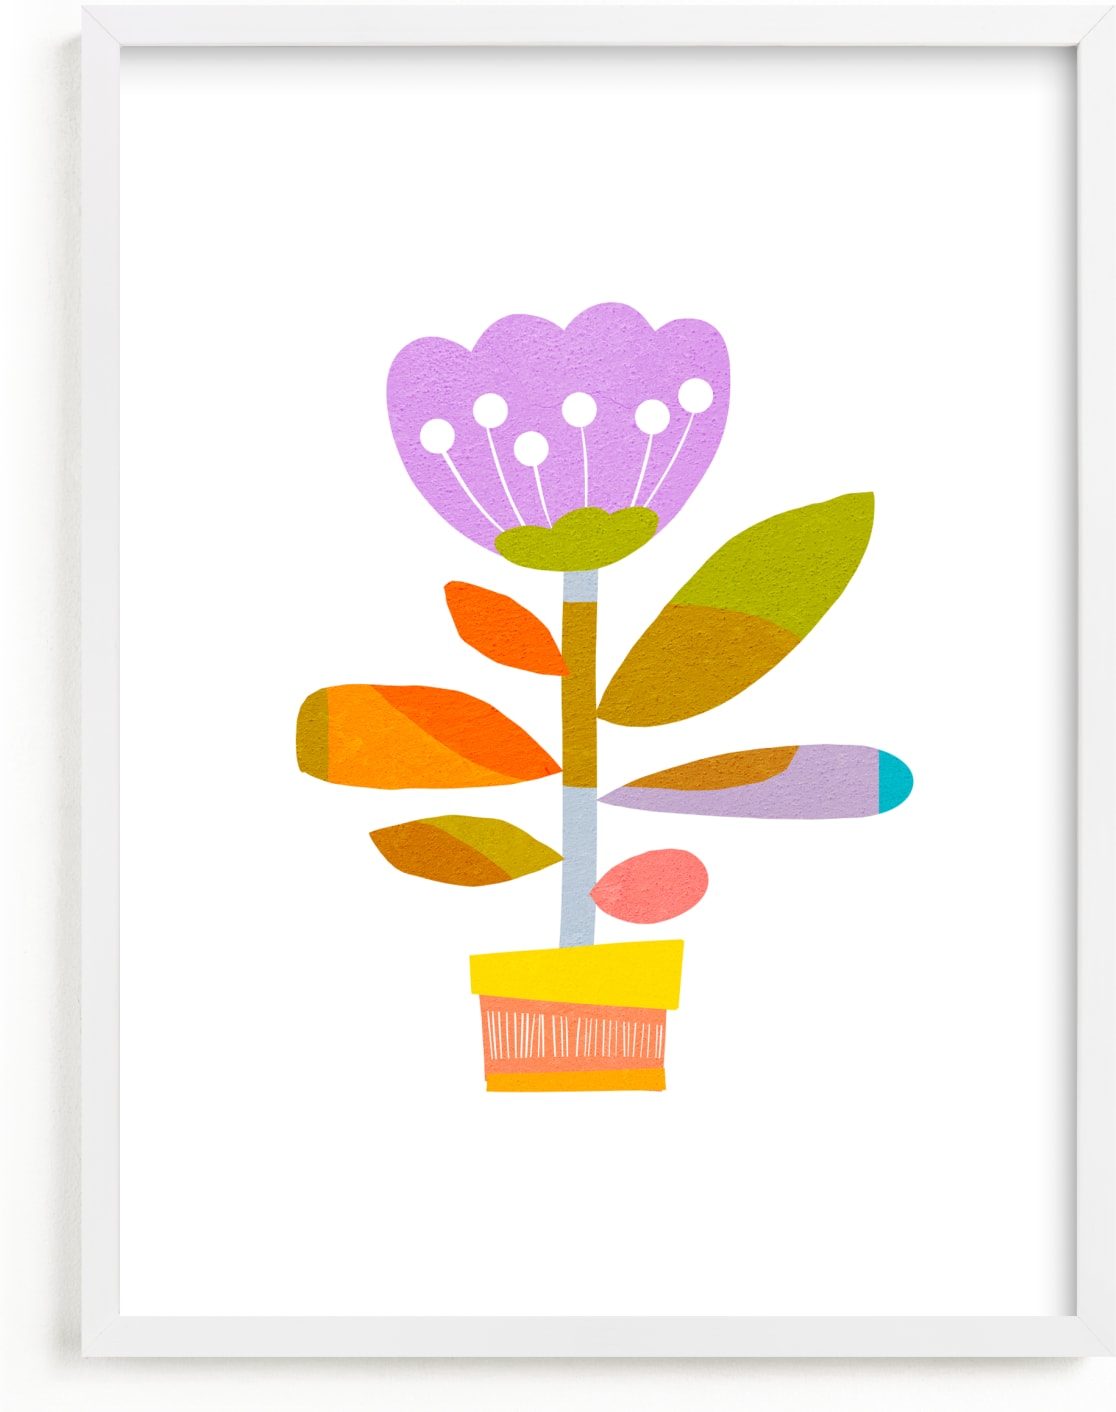 This is a colorful kids wall art by Dominique Vari called The Happiest Flower .